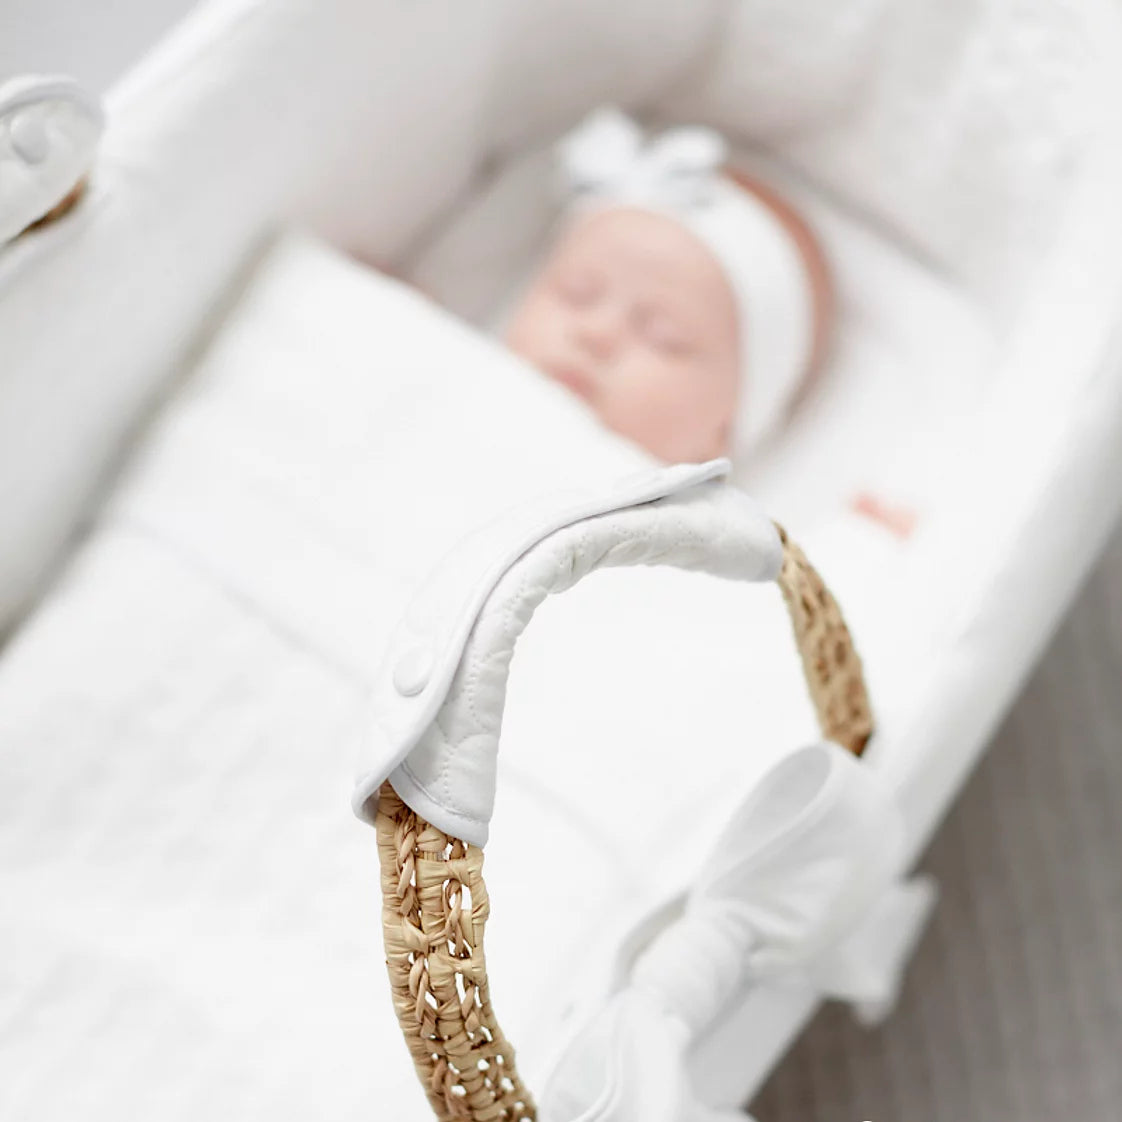 First Crystel White Moses Basket